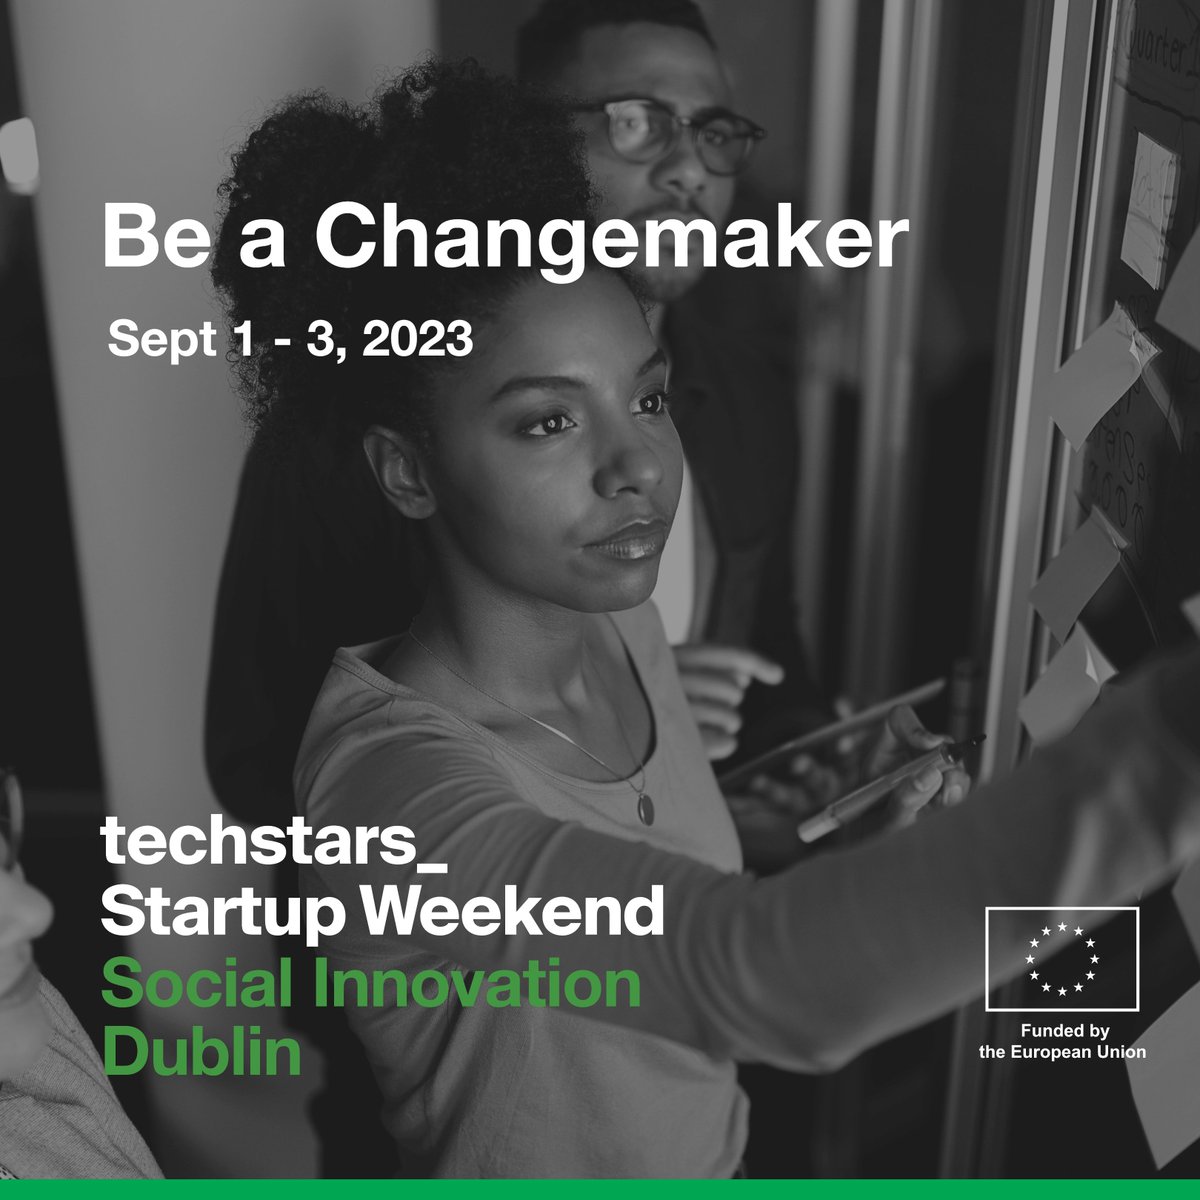 Event Alert!

We are delighted to host our first @Techstars @StartupWeekend event focused on the @UN Sustainable Development Goals and Social
Innovation

Join us to create positive change! 
lnkd.in/eGCE_Pbf

#swsd2023 #socialimpact #socialinnovations #sdgs #startup